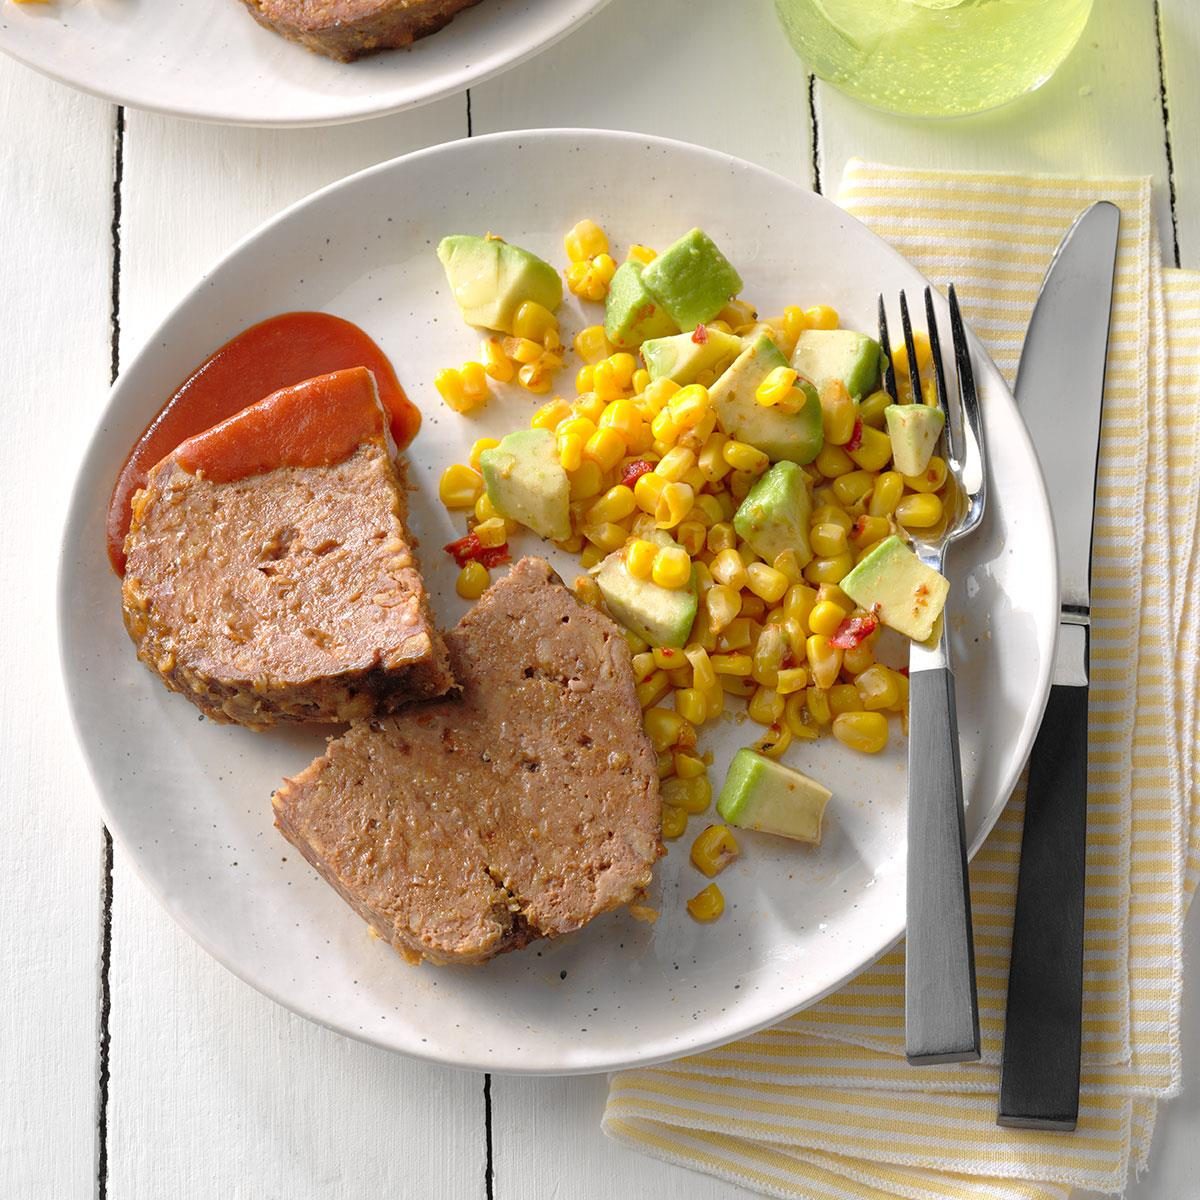 Day 13: Slow-Cooker Meat Loaf